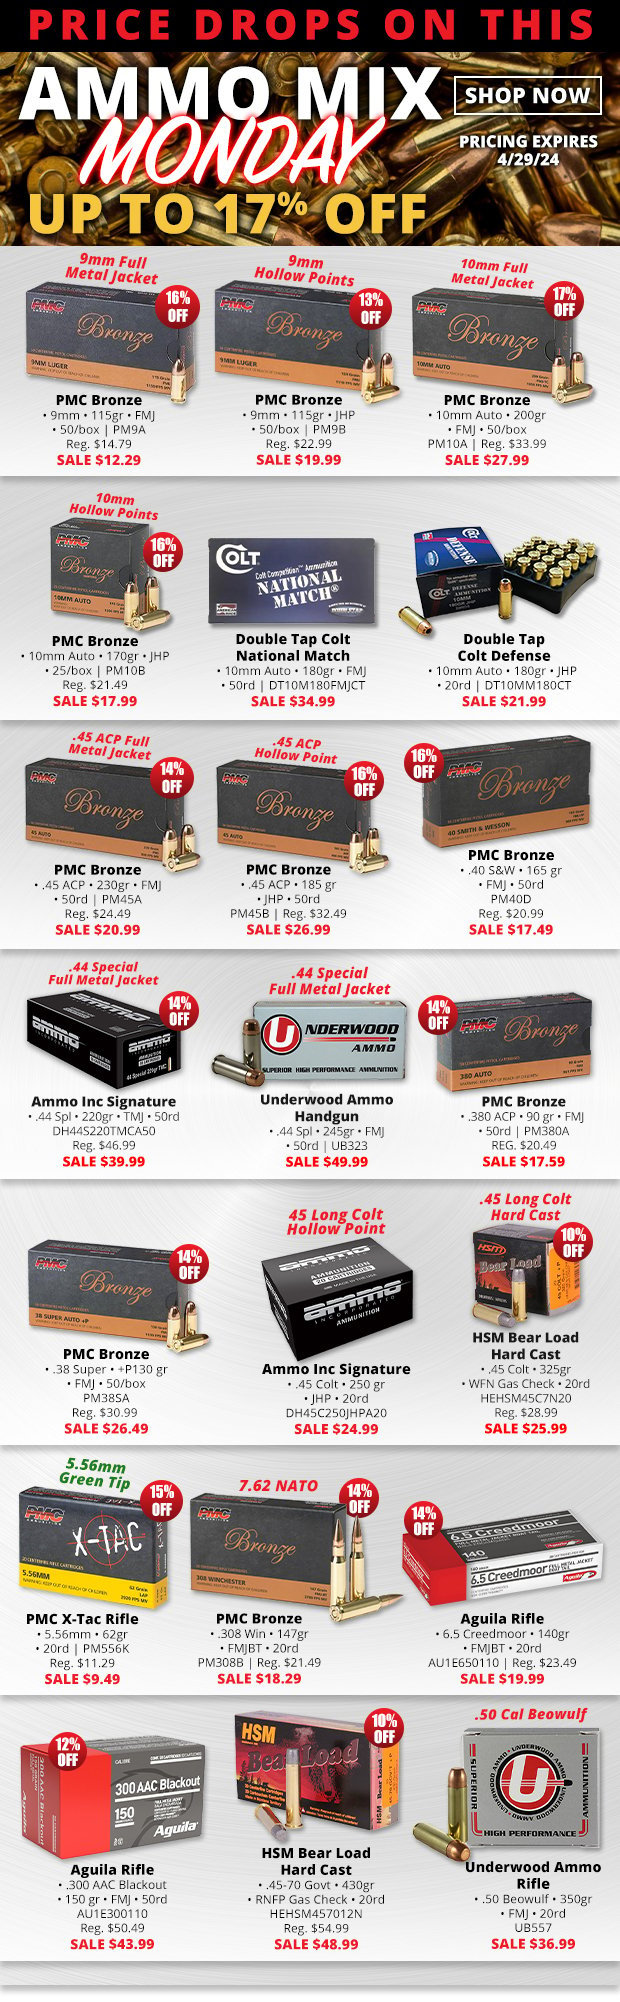 Price Drops on This Ammo Mix Monday!